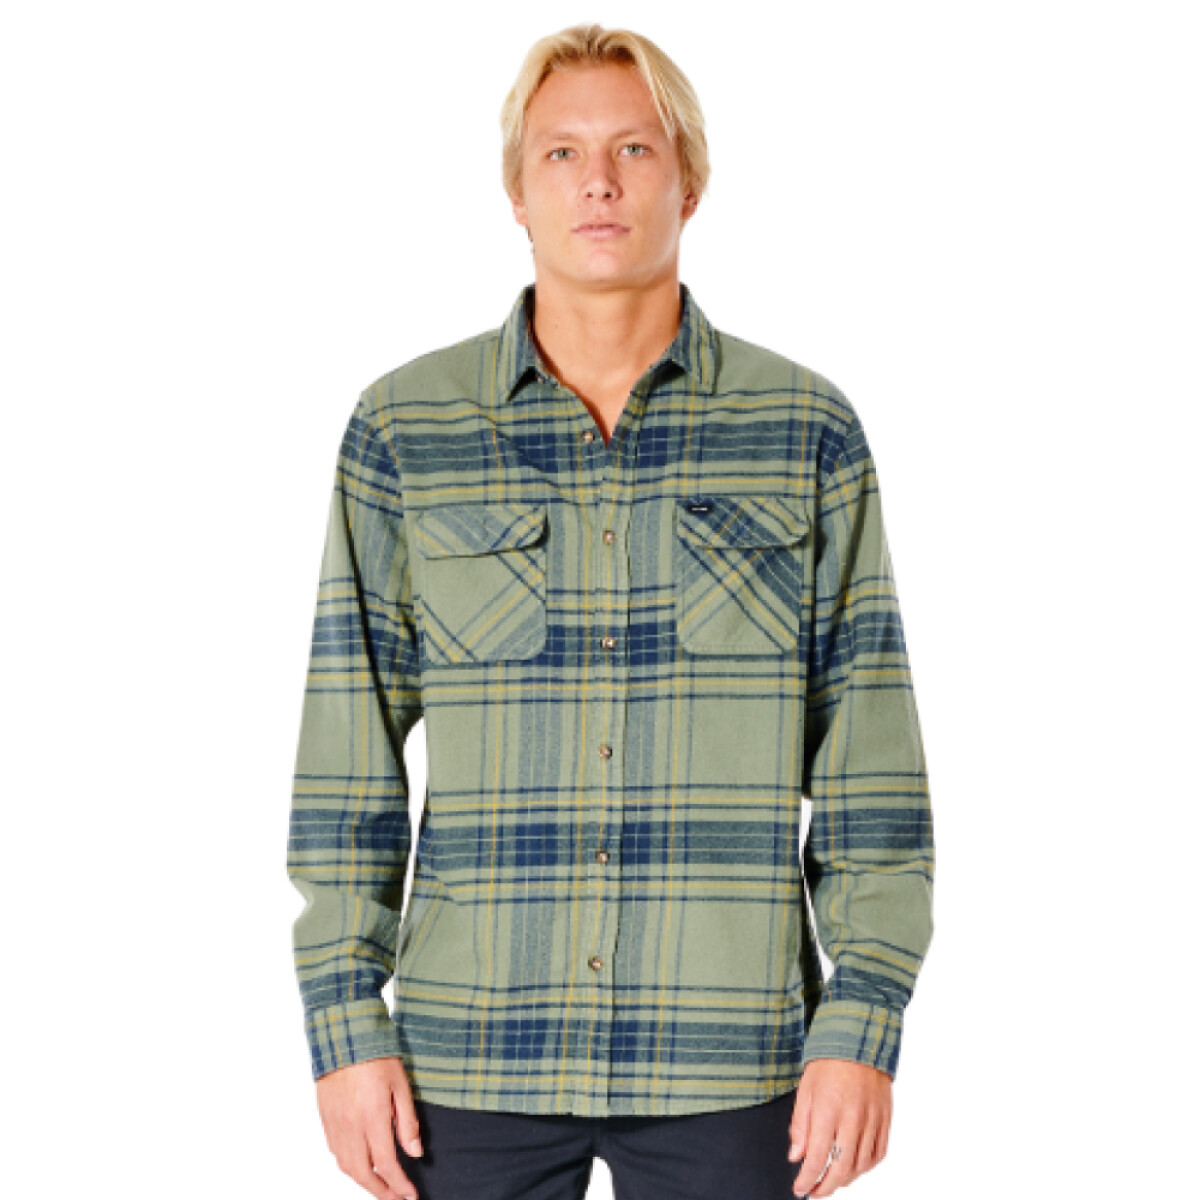 Camisa Rip Curl Swc Flannel 